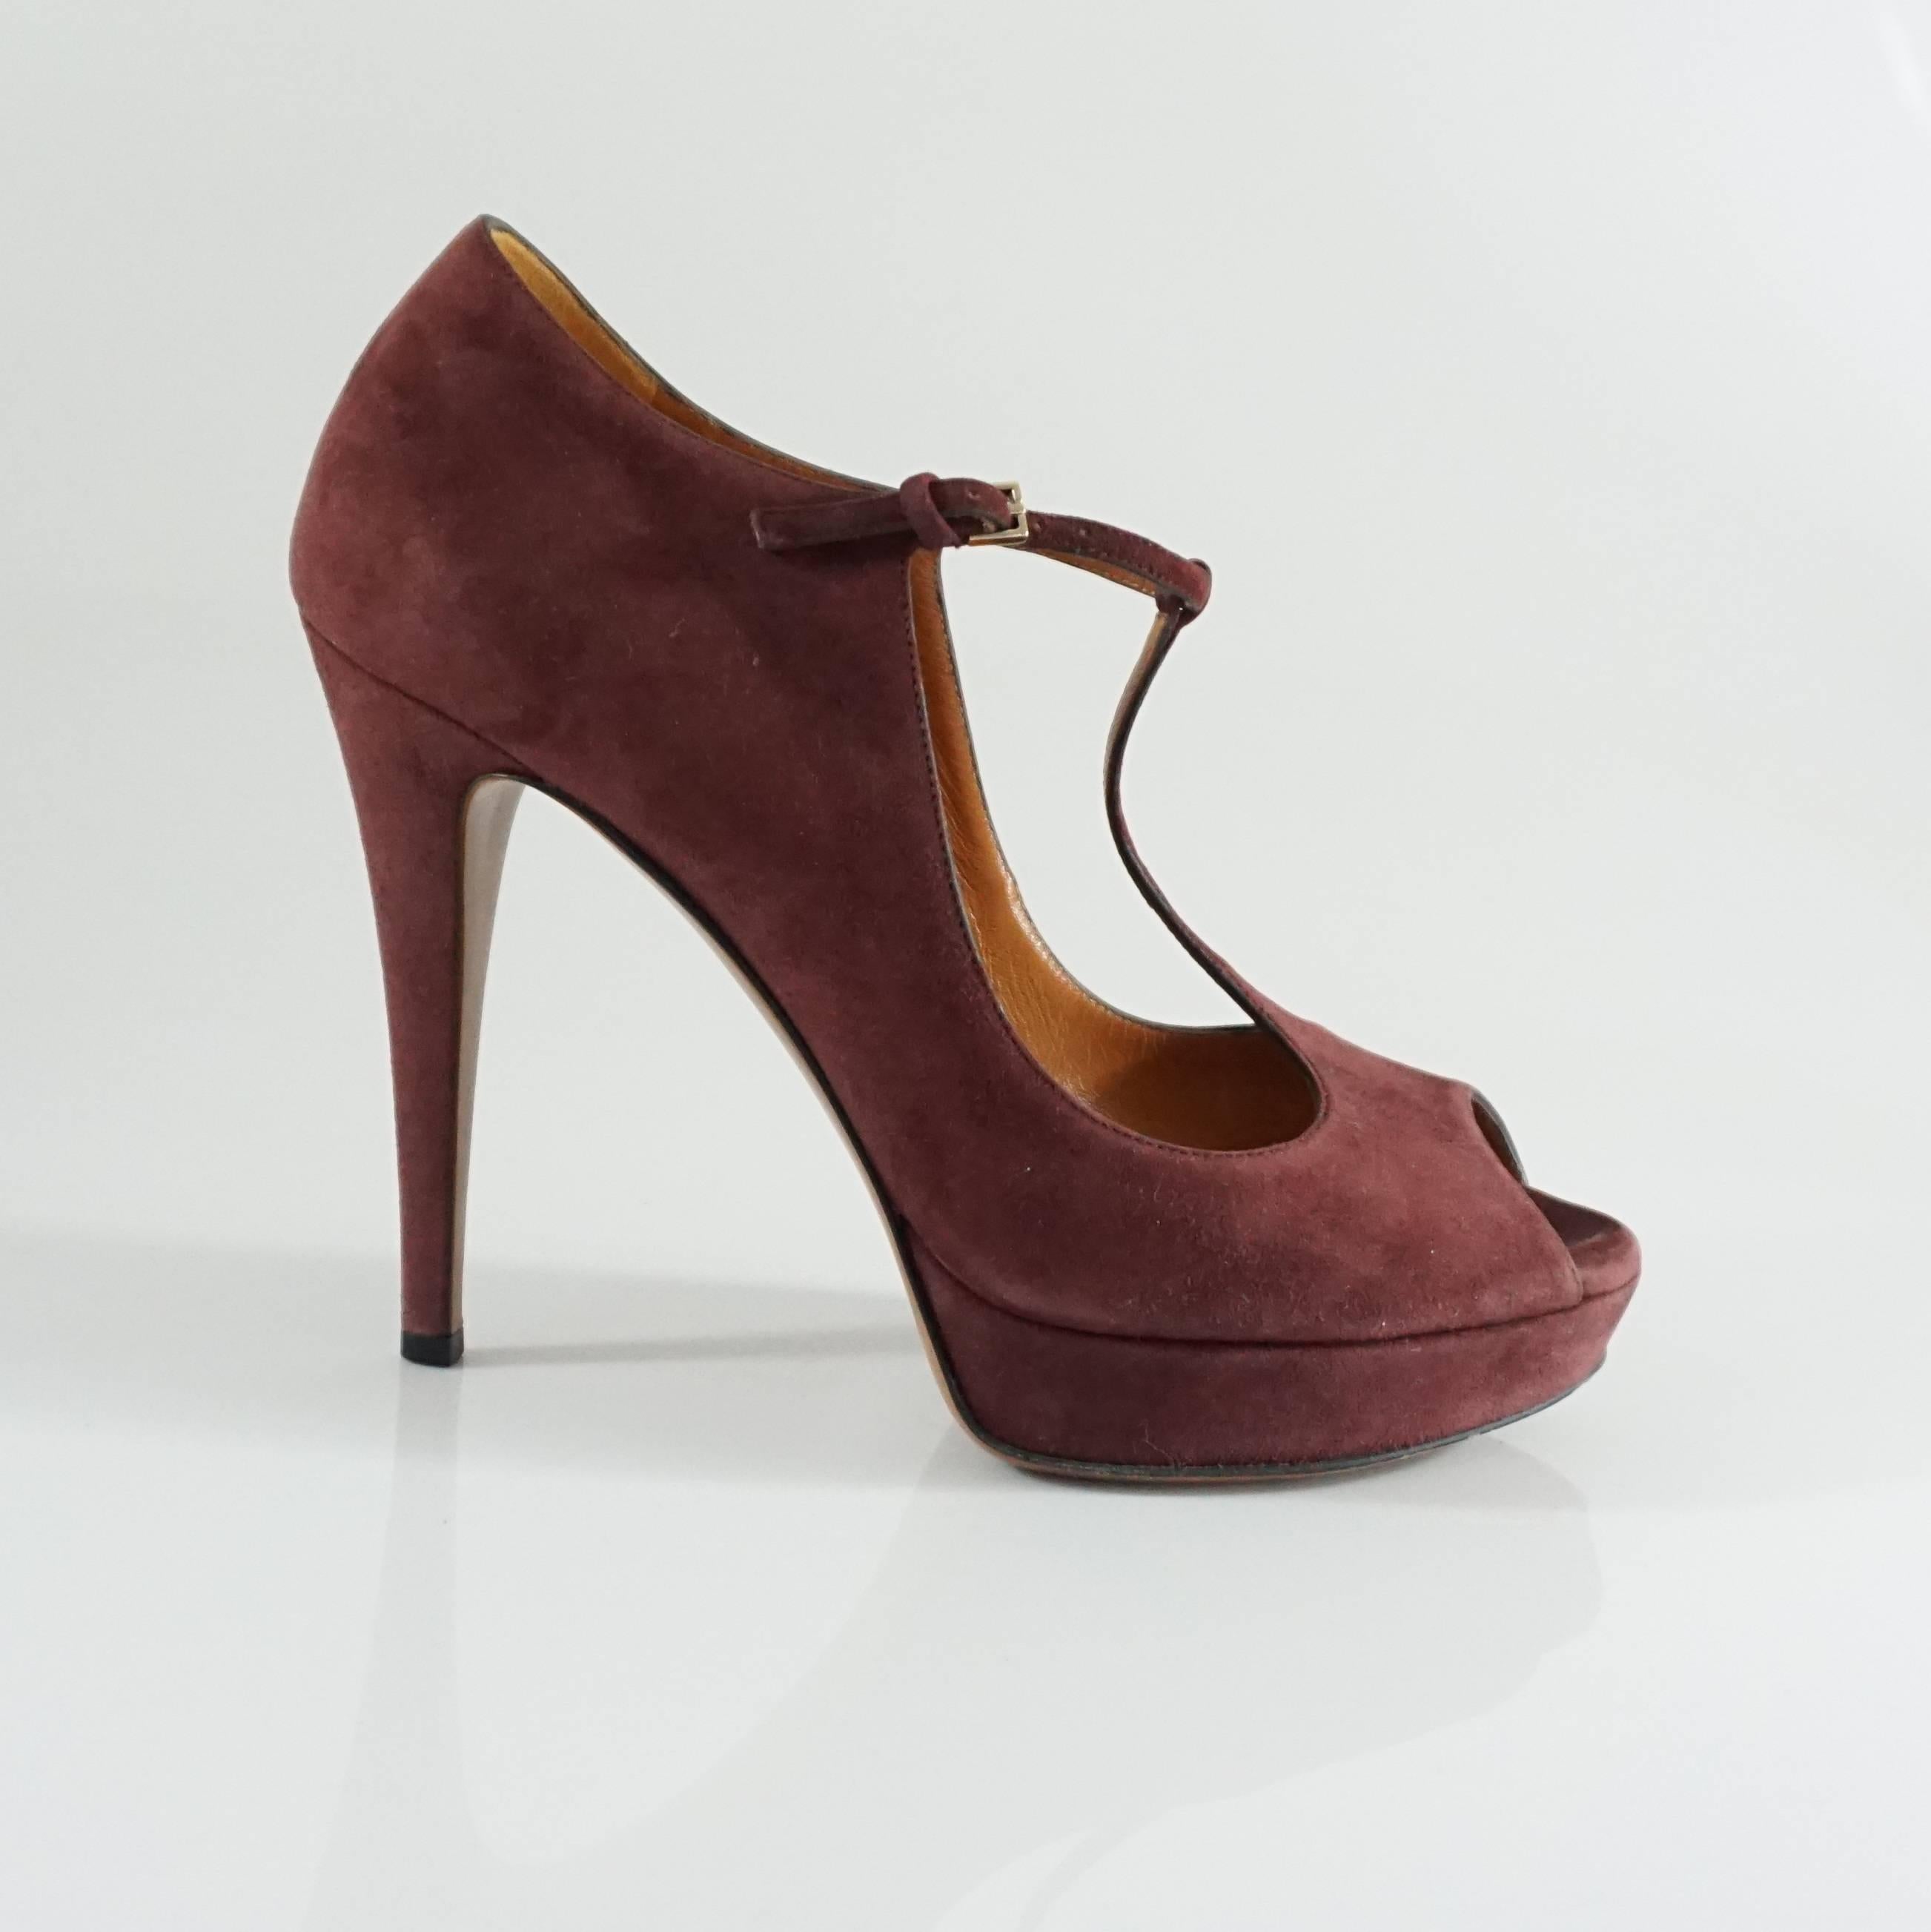 These Gucci platform heels have a t-strap style and are peep-toe. They are in good condition with some general wear to the suede. Size 38.5.

Heel Height: 4.75